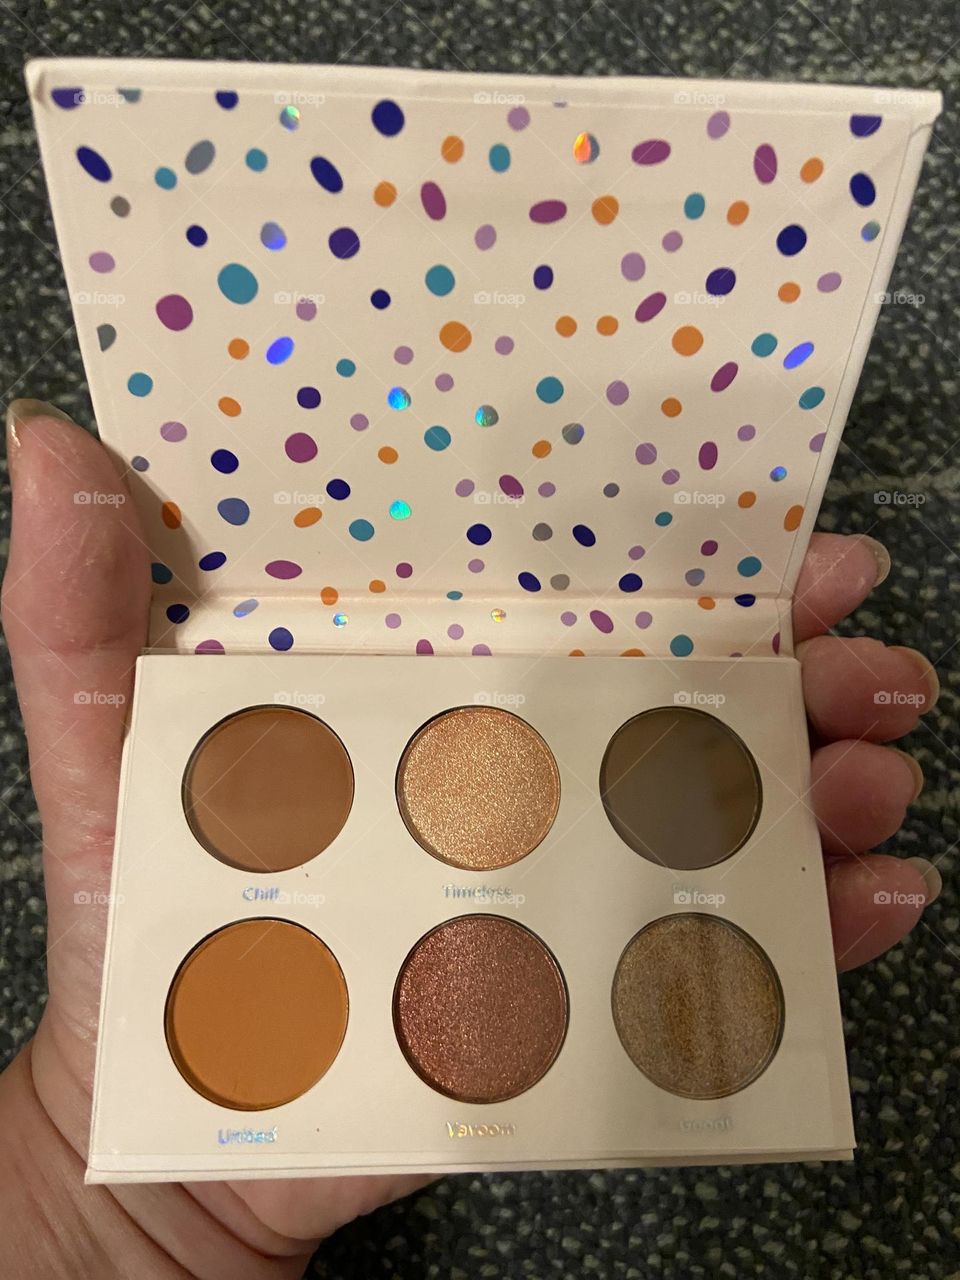 My hand holding Ulta Beauty Fresh Faced 6-piece eye shadow palette, which was part an exclusive collaboration with Essence Magazine called Girls United: Beautiful Possibilities, a special mentoring initiative created by 6 teens per the package info. 